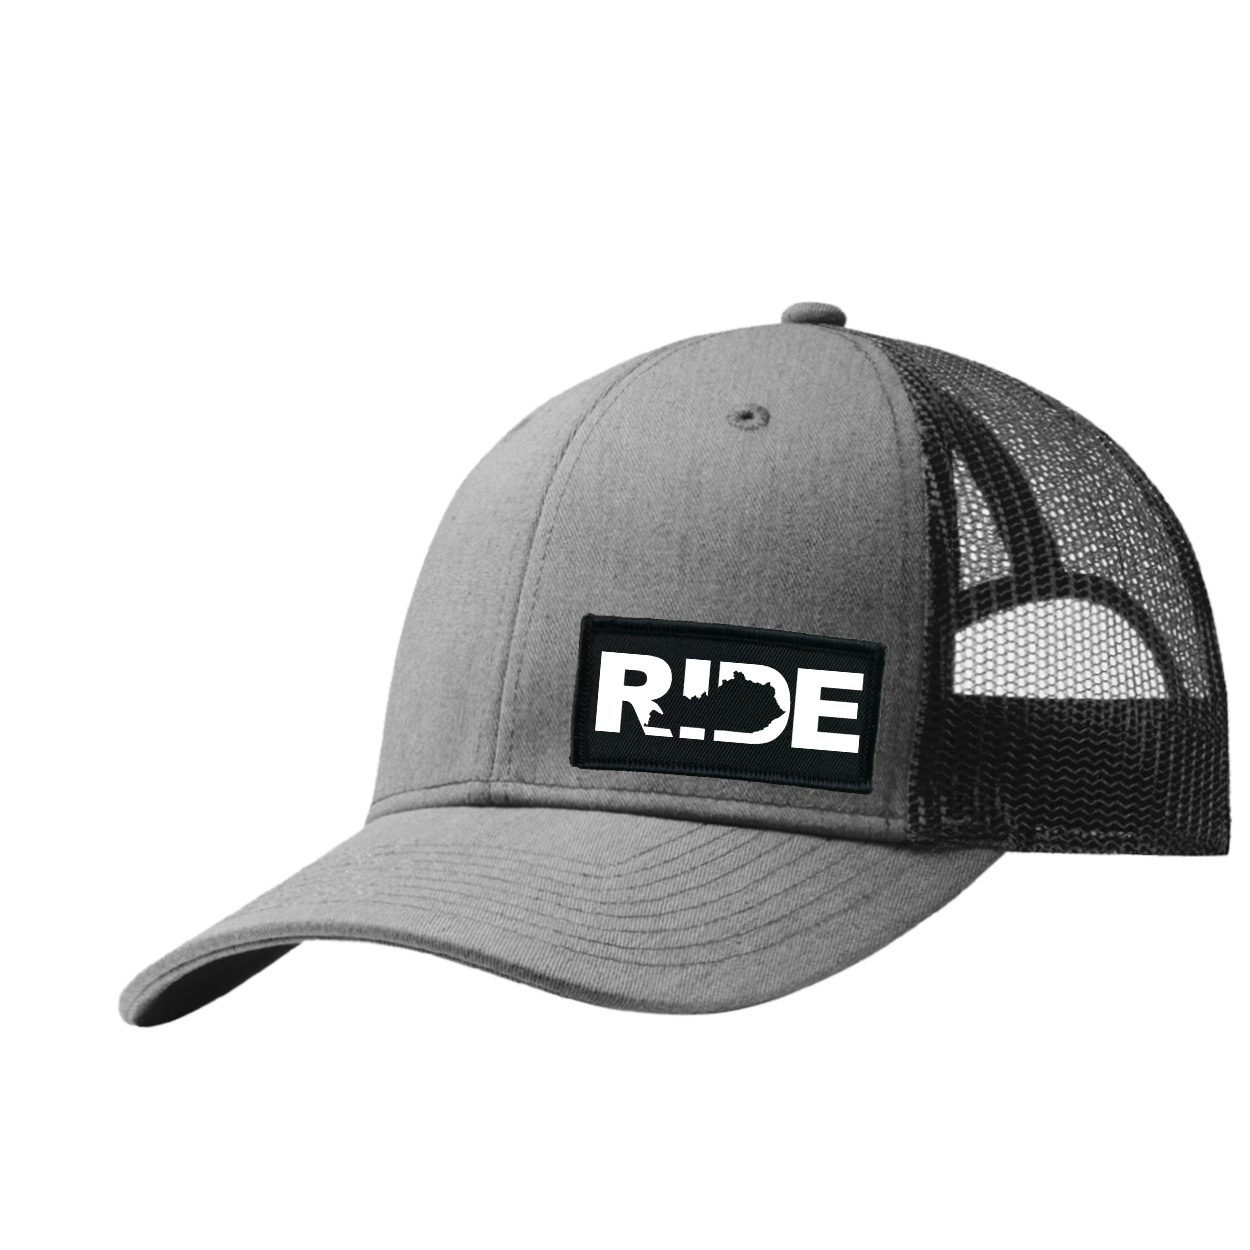 Ride Kentucky Night Out Woven Patch Snapback Trucker Hat Heather Gray/Black (White Logo)